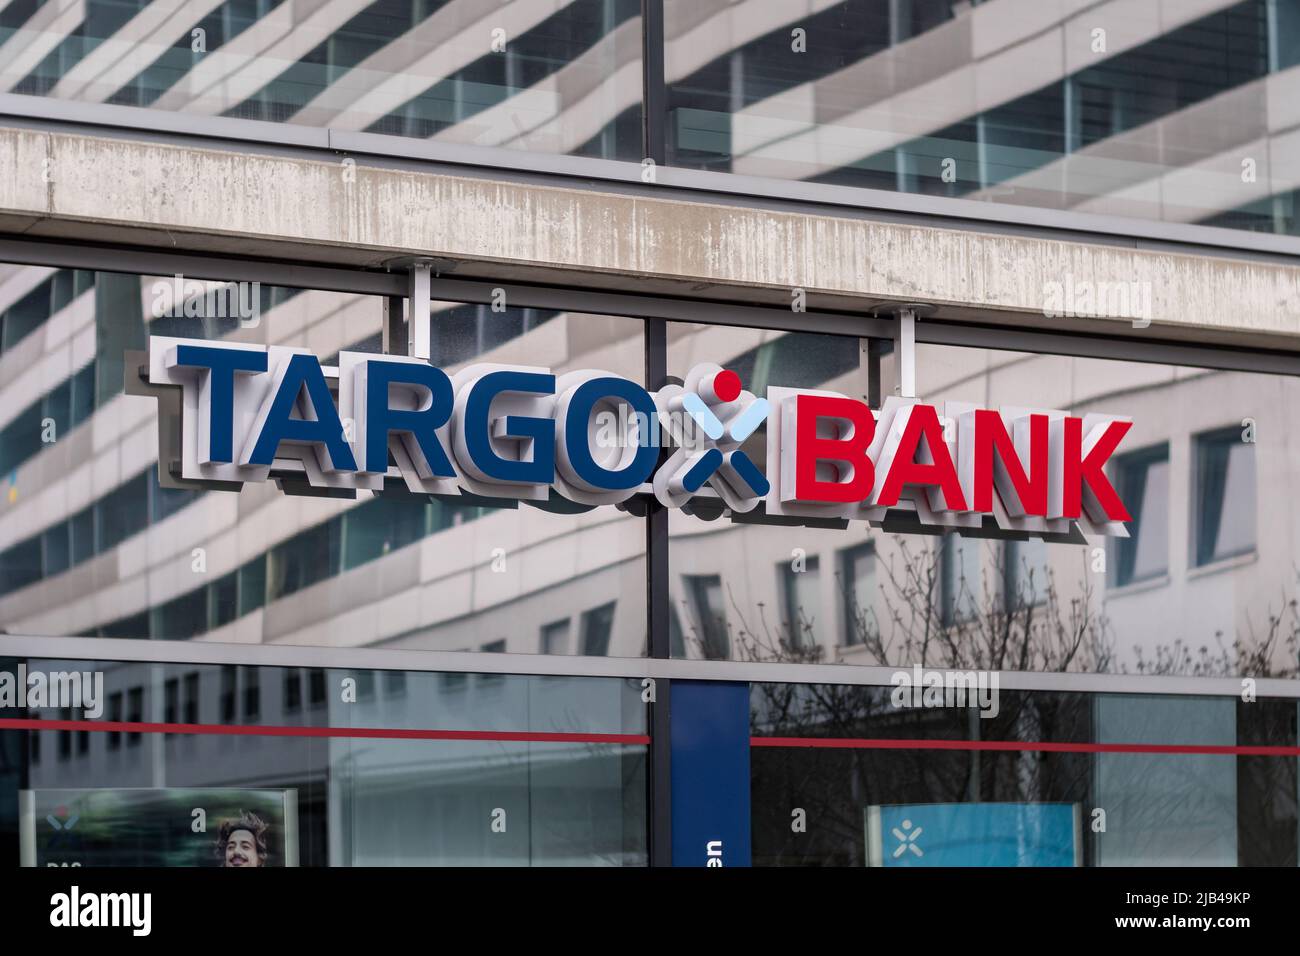 Targobank logo on a building exterior in the city. The windows on the facade are reflecting the surrounding architecture. Banking service in Europe. Stock Photo